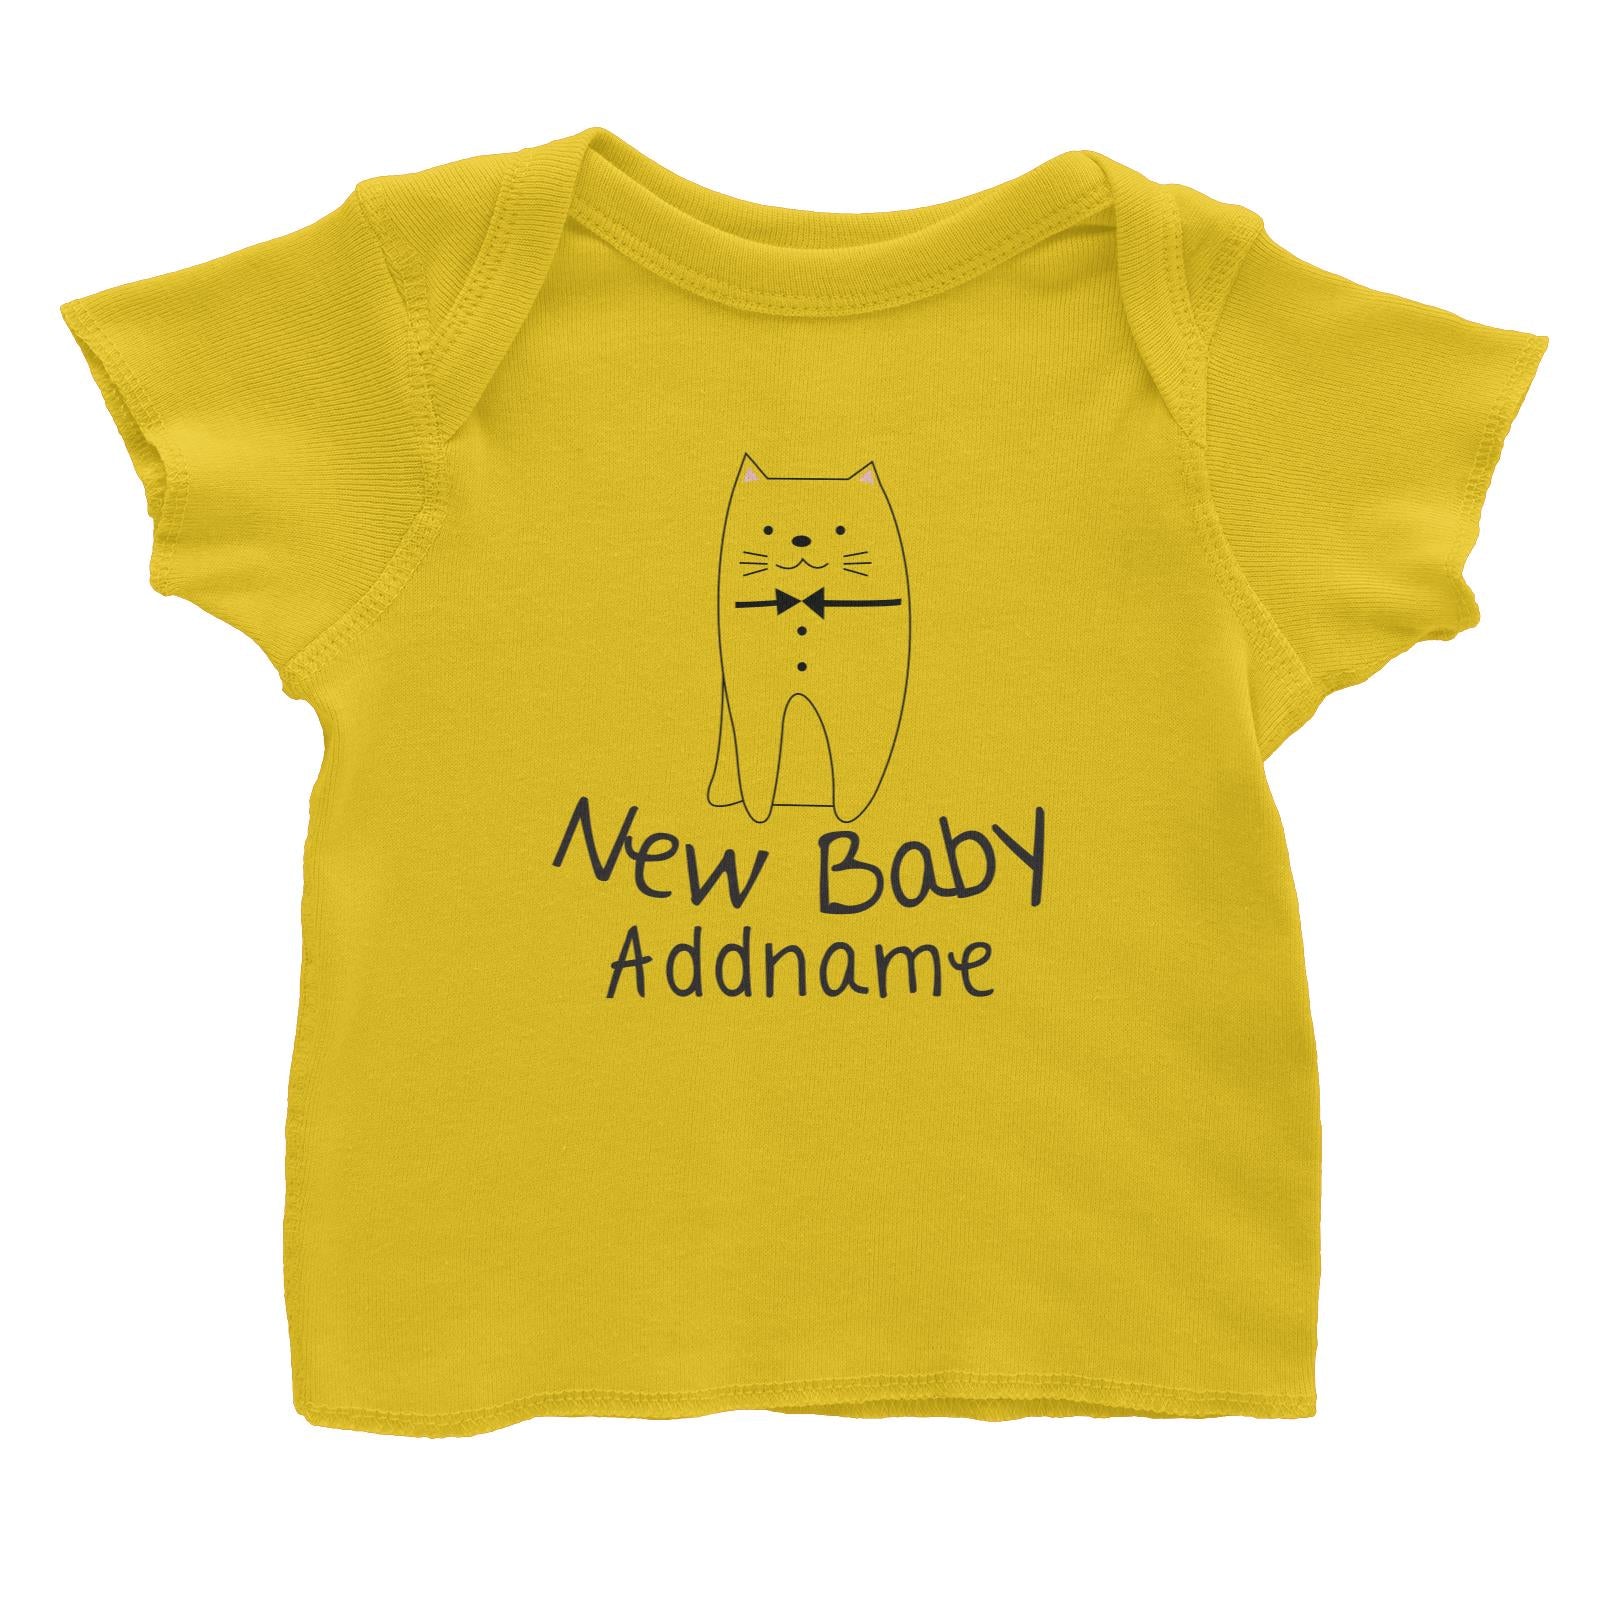 Cute Animals and Friends Series 2 Cat New Baby Addname Baby T-Shirt